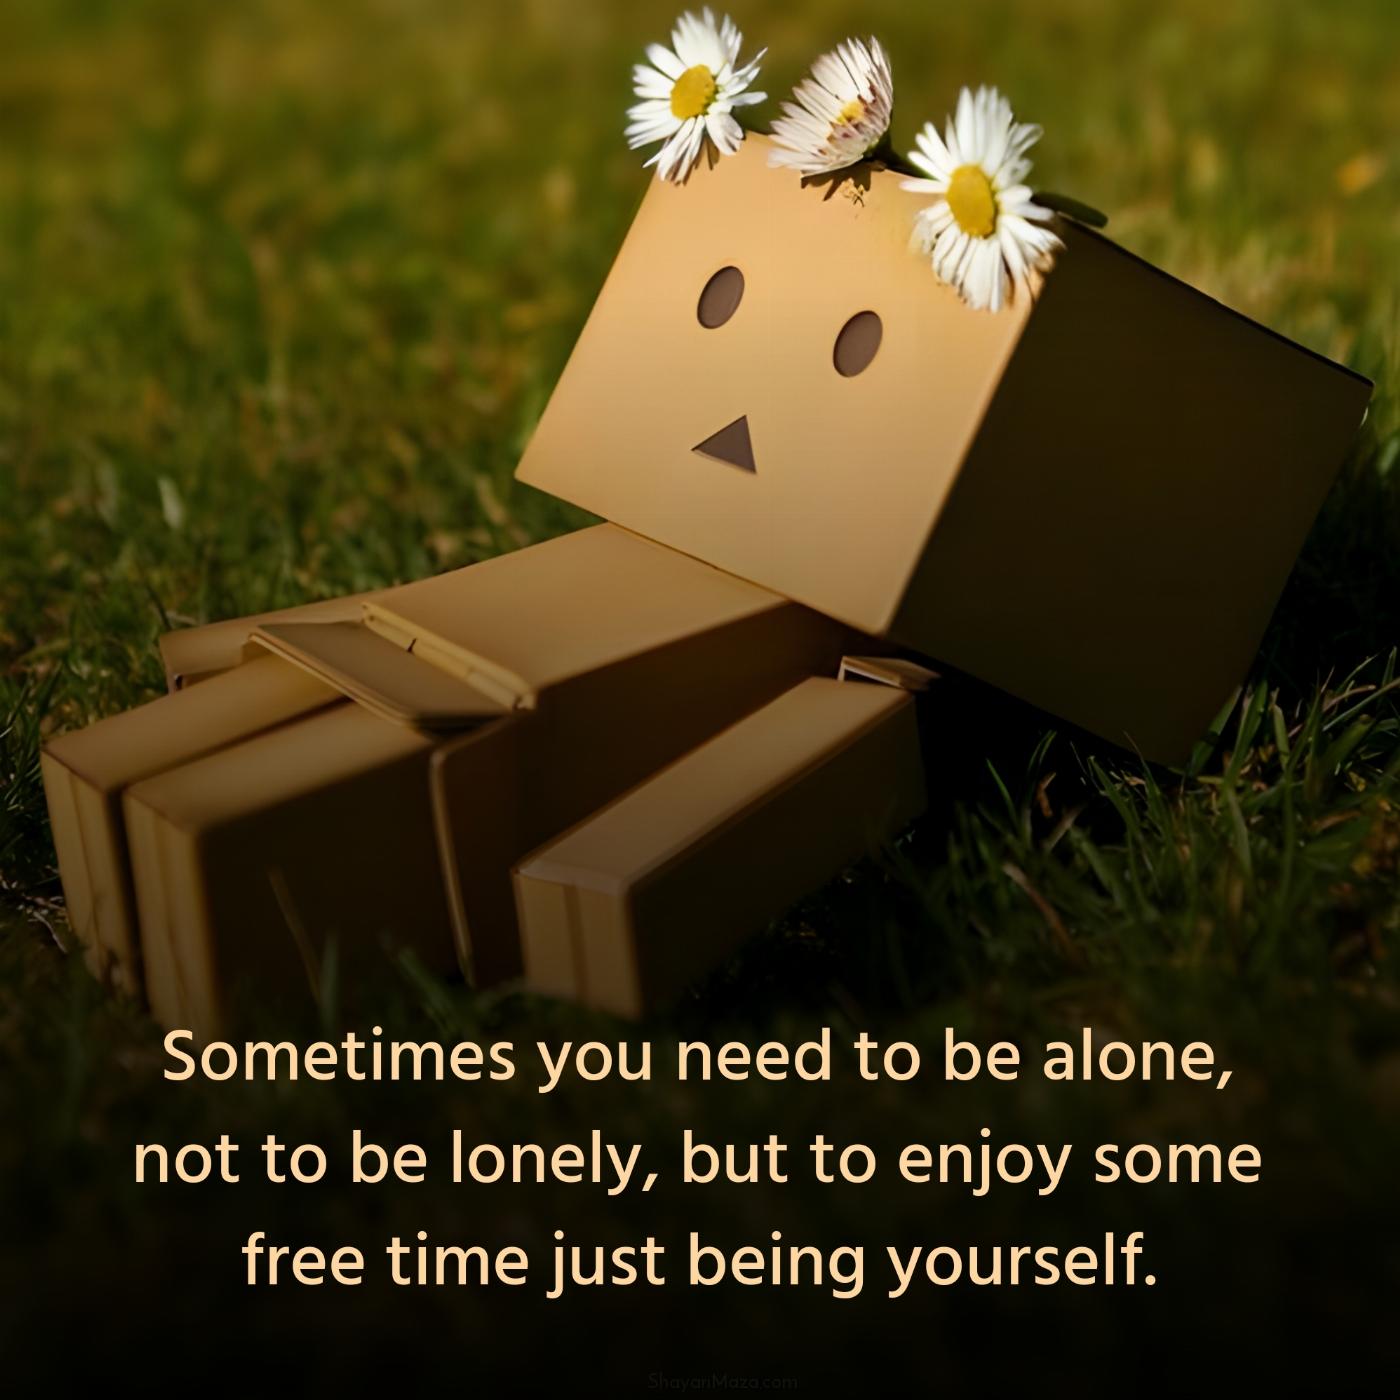 Sometimes you need to be alone not to be lonely